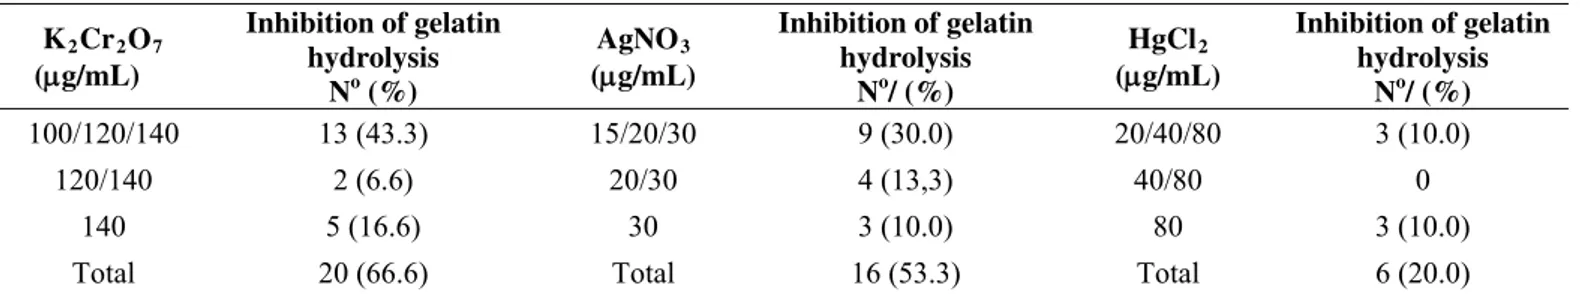 Table 3. Number of Gram negative strains that presented inhibition of gelatin hydrolysis in the presence of different metal  concentrations *    K 2 Cr 2 O 7       (g/mL)  Inhibition of gelatin hydrolysis  N o  (%)  AgNO 3 (g/mL) Inhibition of gelatin hy